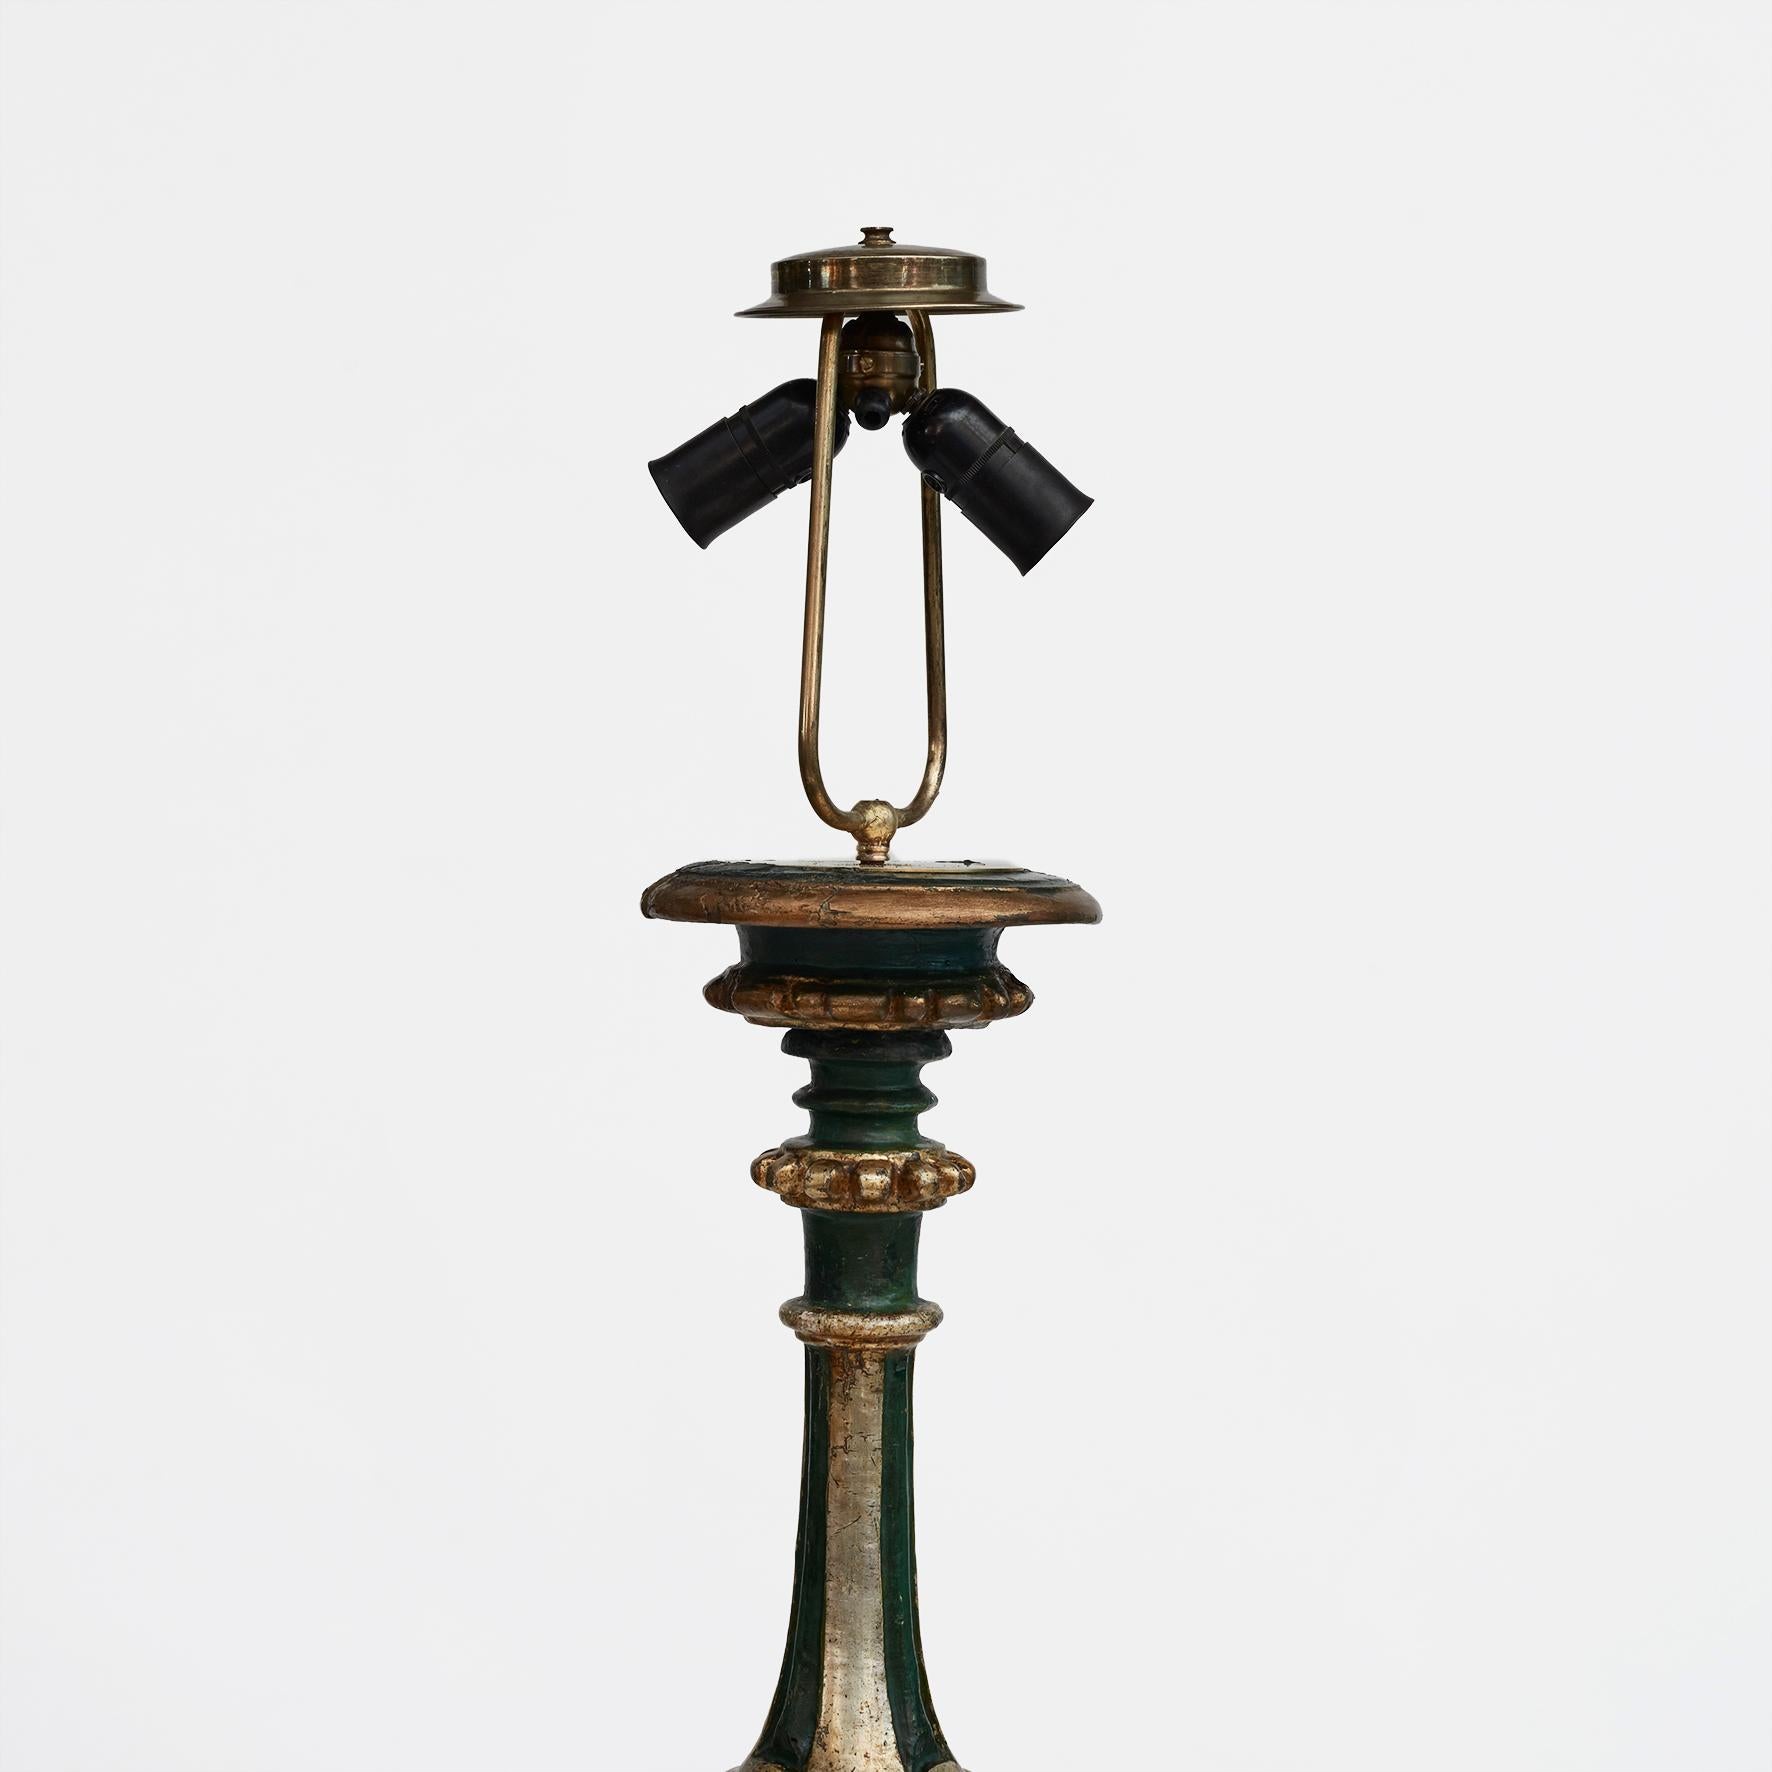 A decorative Italian 18th century Baroque period floor-standing torchière lamp.
Wood carved rich in details and painted in green, giltwood and silver leaf.
In untouched and original condition with beautiful distressed age-related patina.

The